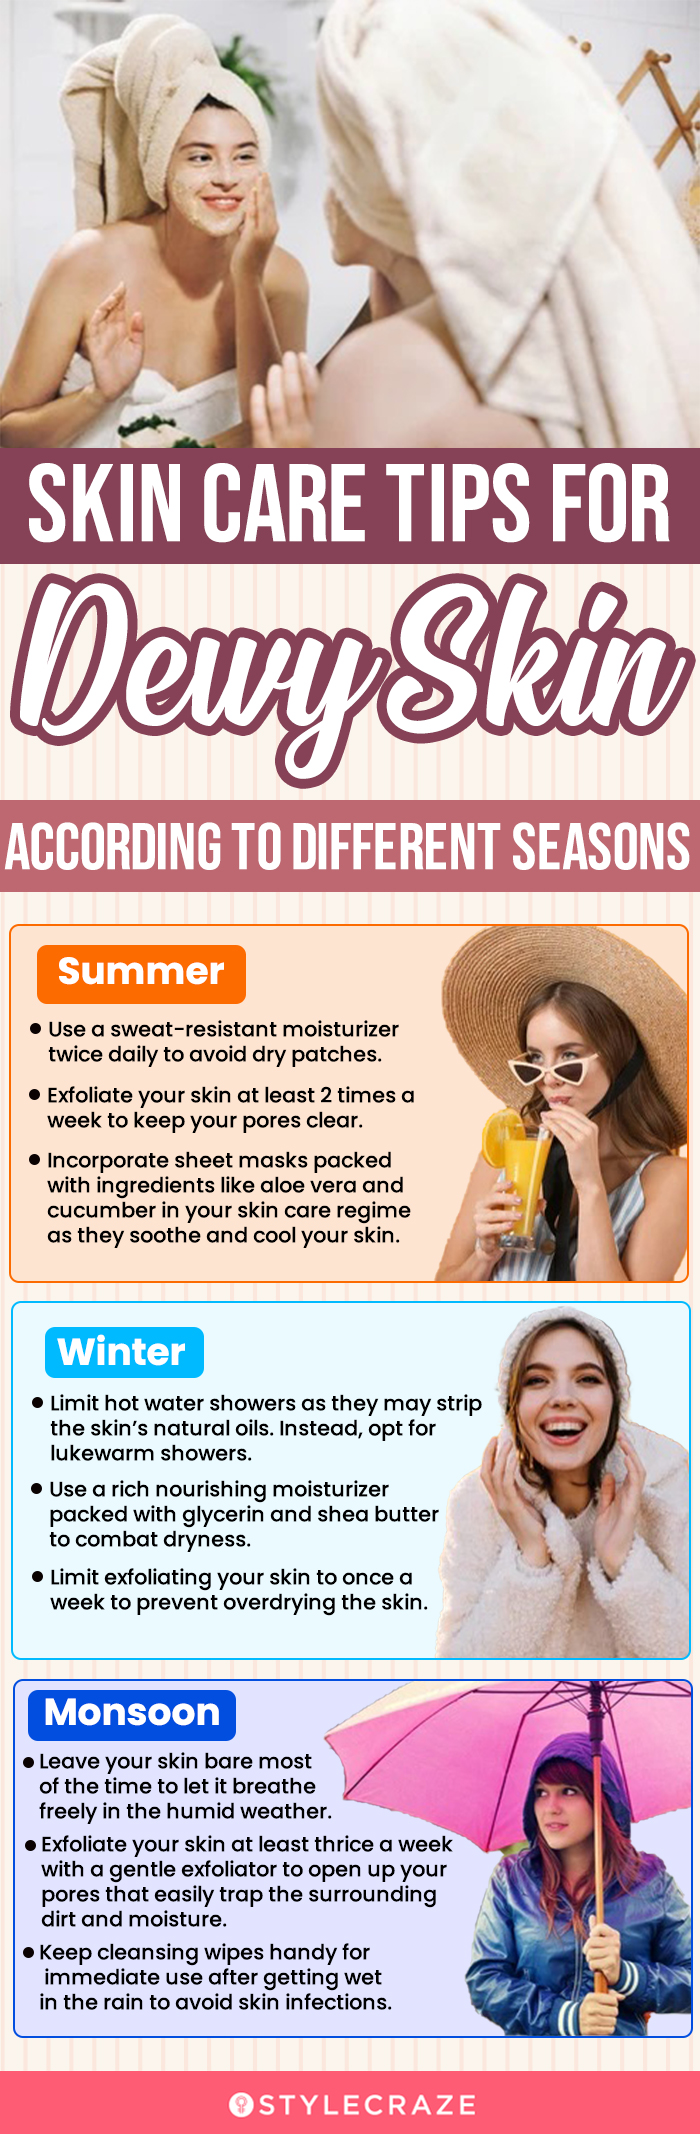 Skin Care Tips For Dewy Skin, According To Different Seasons (infographic)